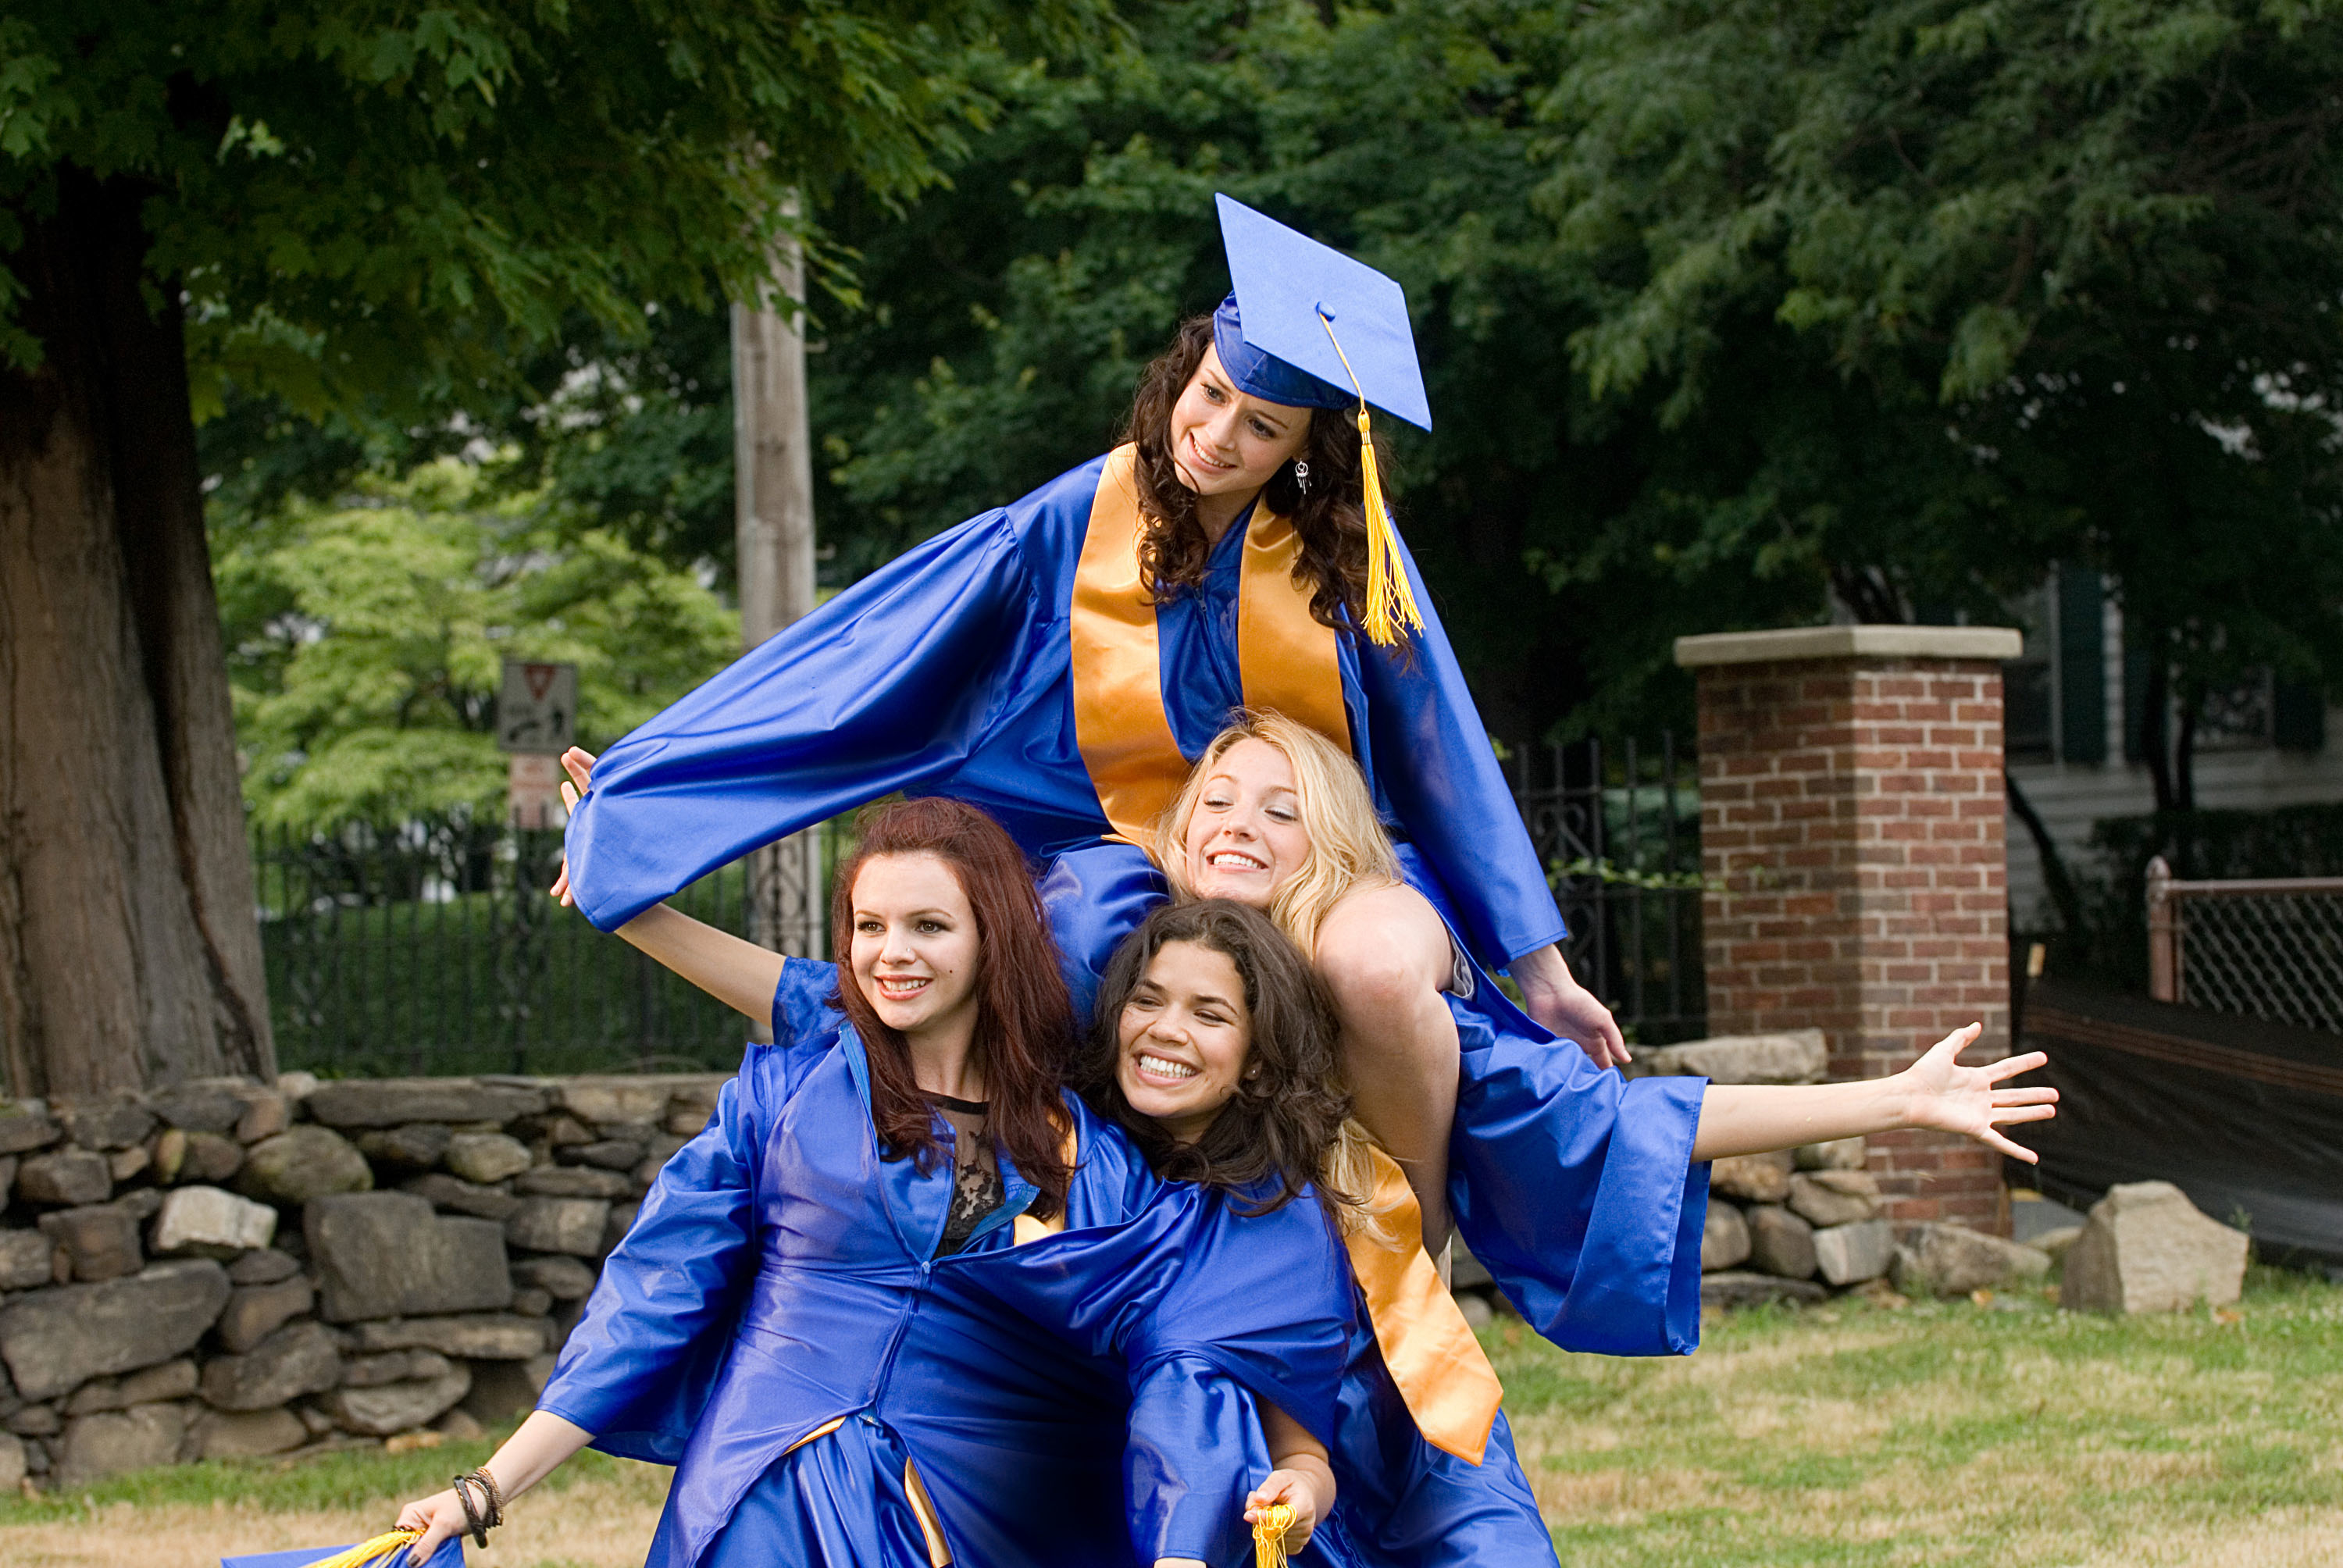 The friends posing for fun graduation photos in a scene from &quot;The Sisterhood of the Traveling Pants&quot;